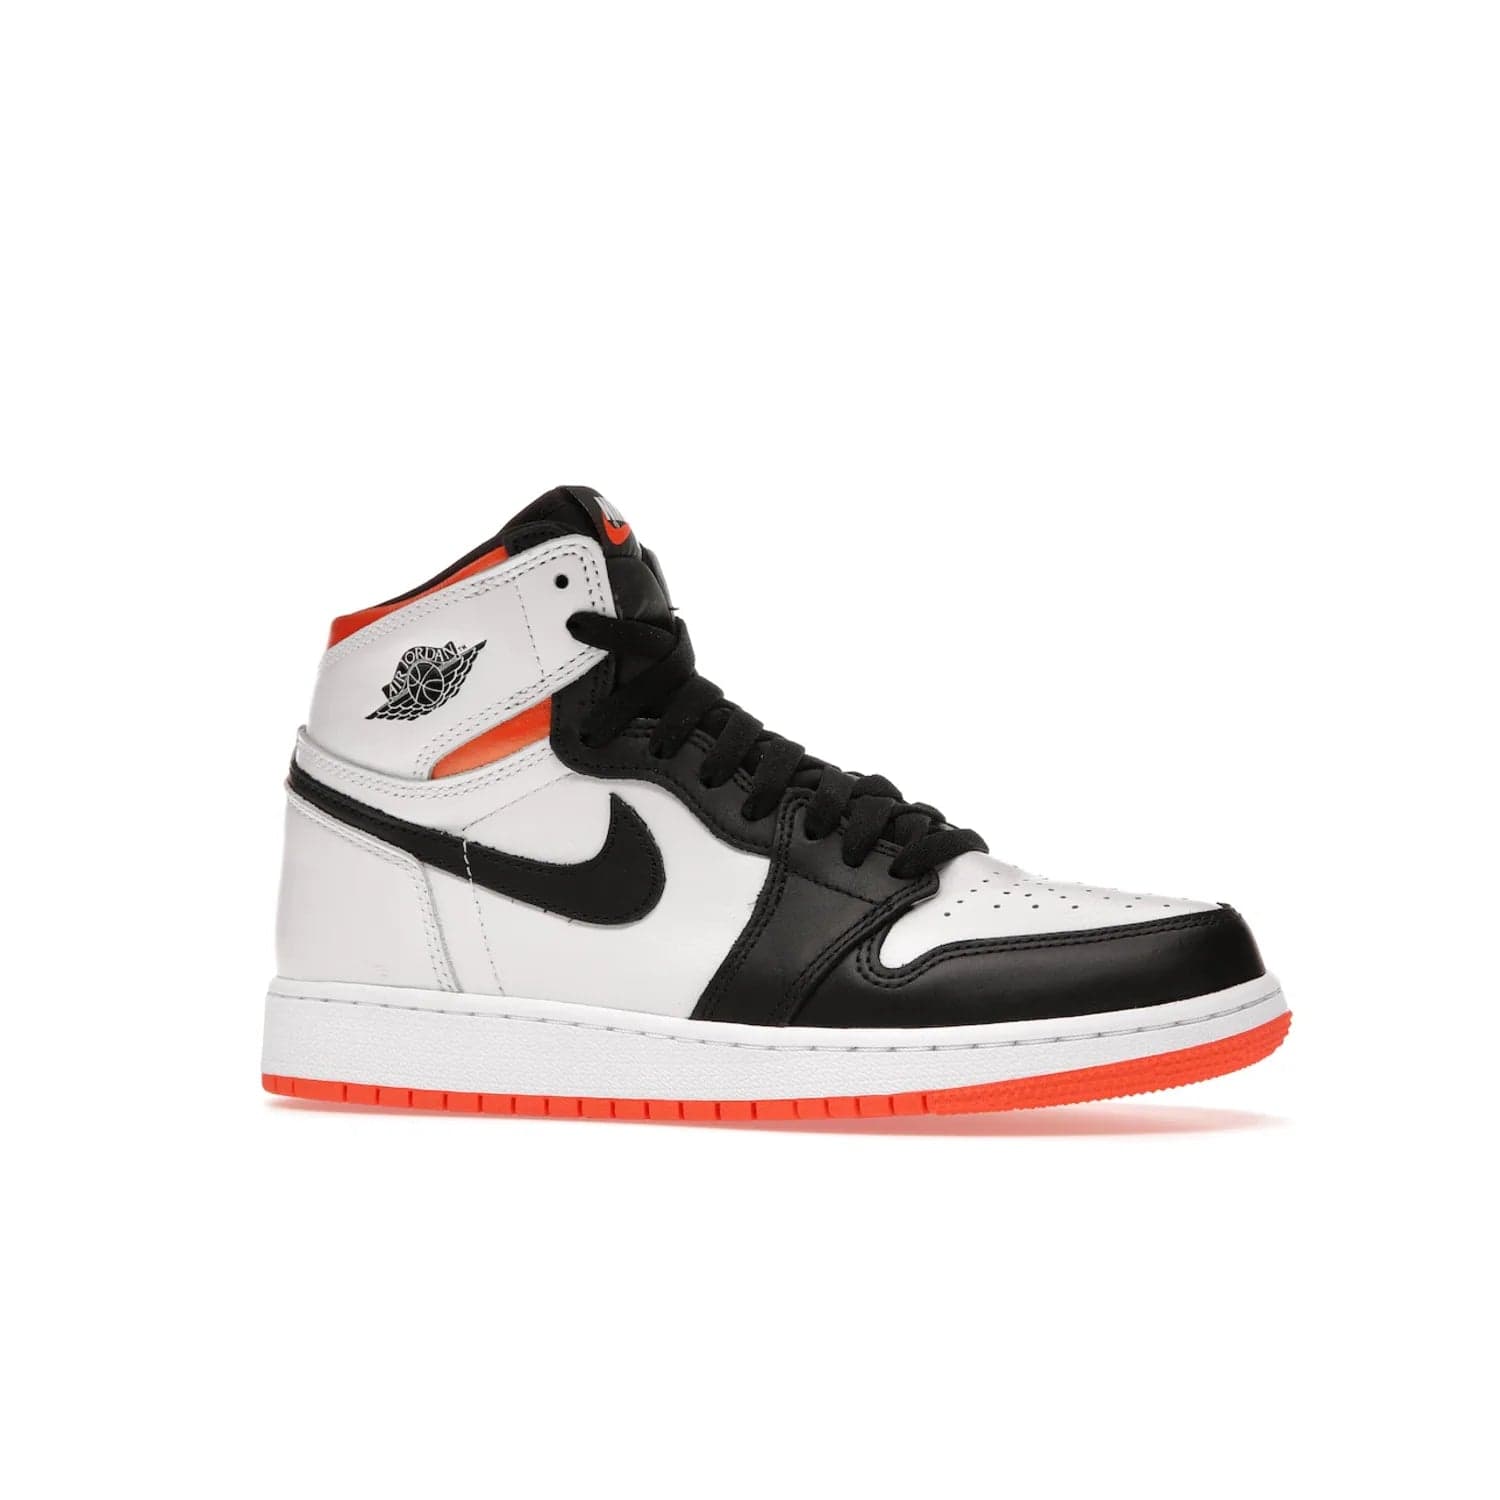 Jordan 1 High OG Electro Orange (GS) - Image 3 - Only at www.BallersClubKickz.com - The Air Jordan 1 High OG Electro Orange GS is the ideal shoe for kids on the go. Featuring white leather uppers, black overlays, and bright orange accents, it's sure to become a favorite. A great mix of classic style and vibrant colors, the shoe delivers air cushioning for comfort and hard orange rubber for grip. Release on July 17th, 2021. Get them a pair today.